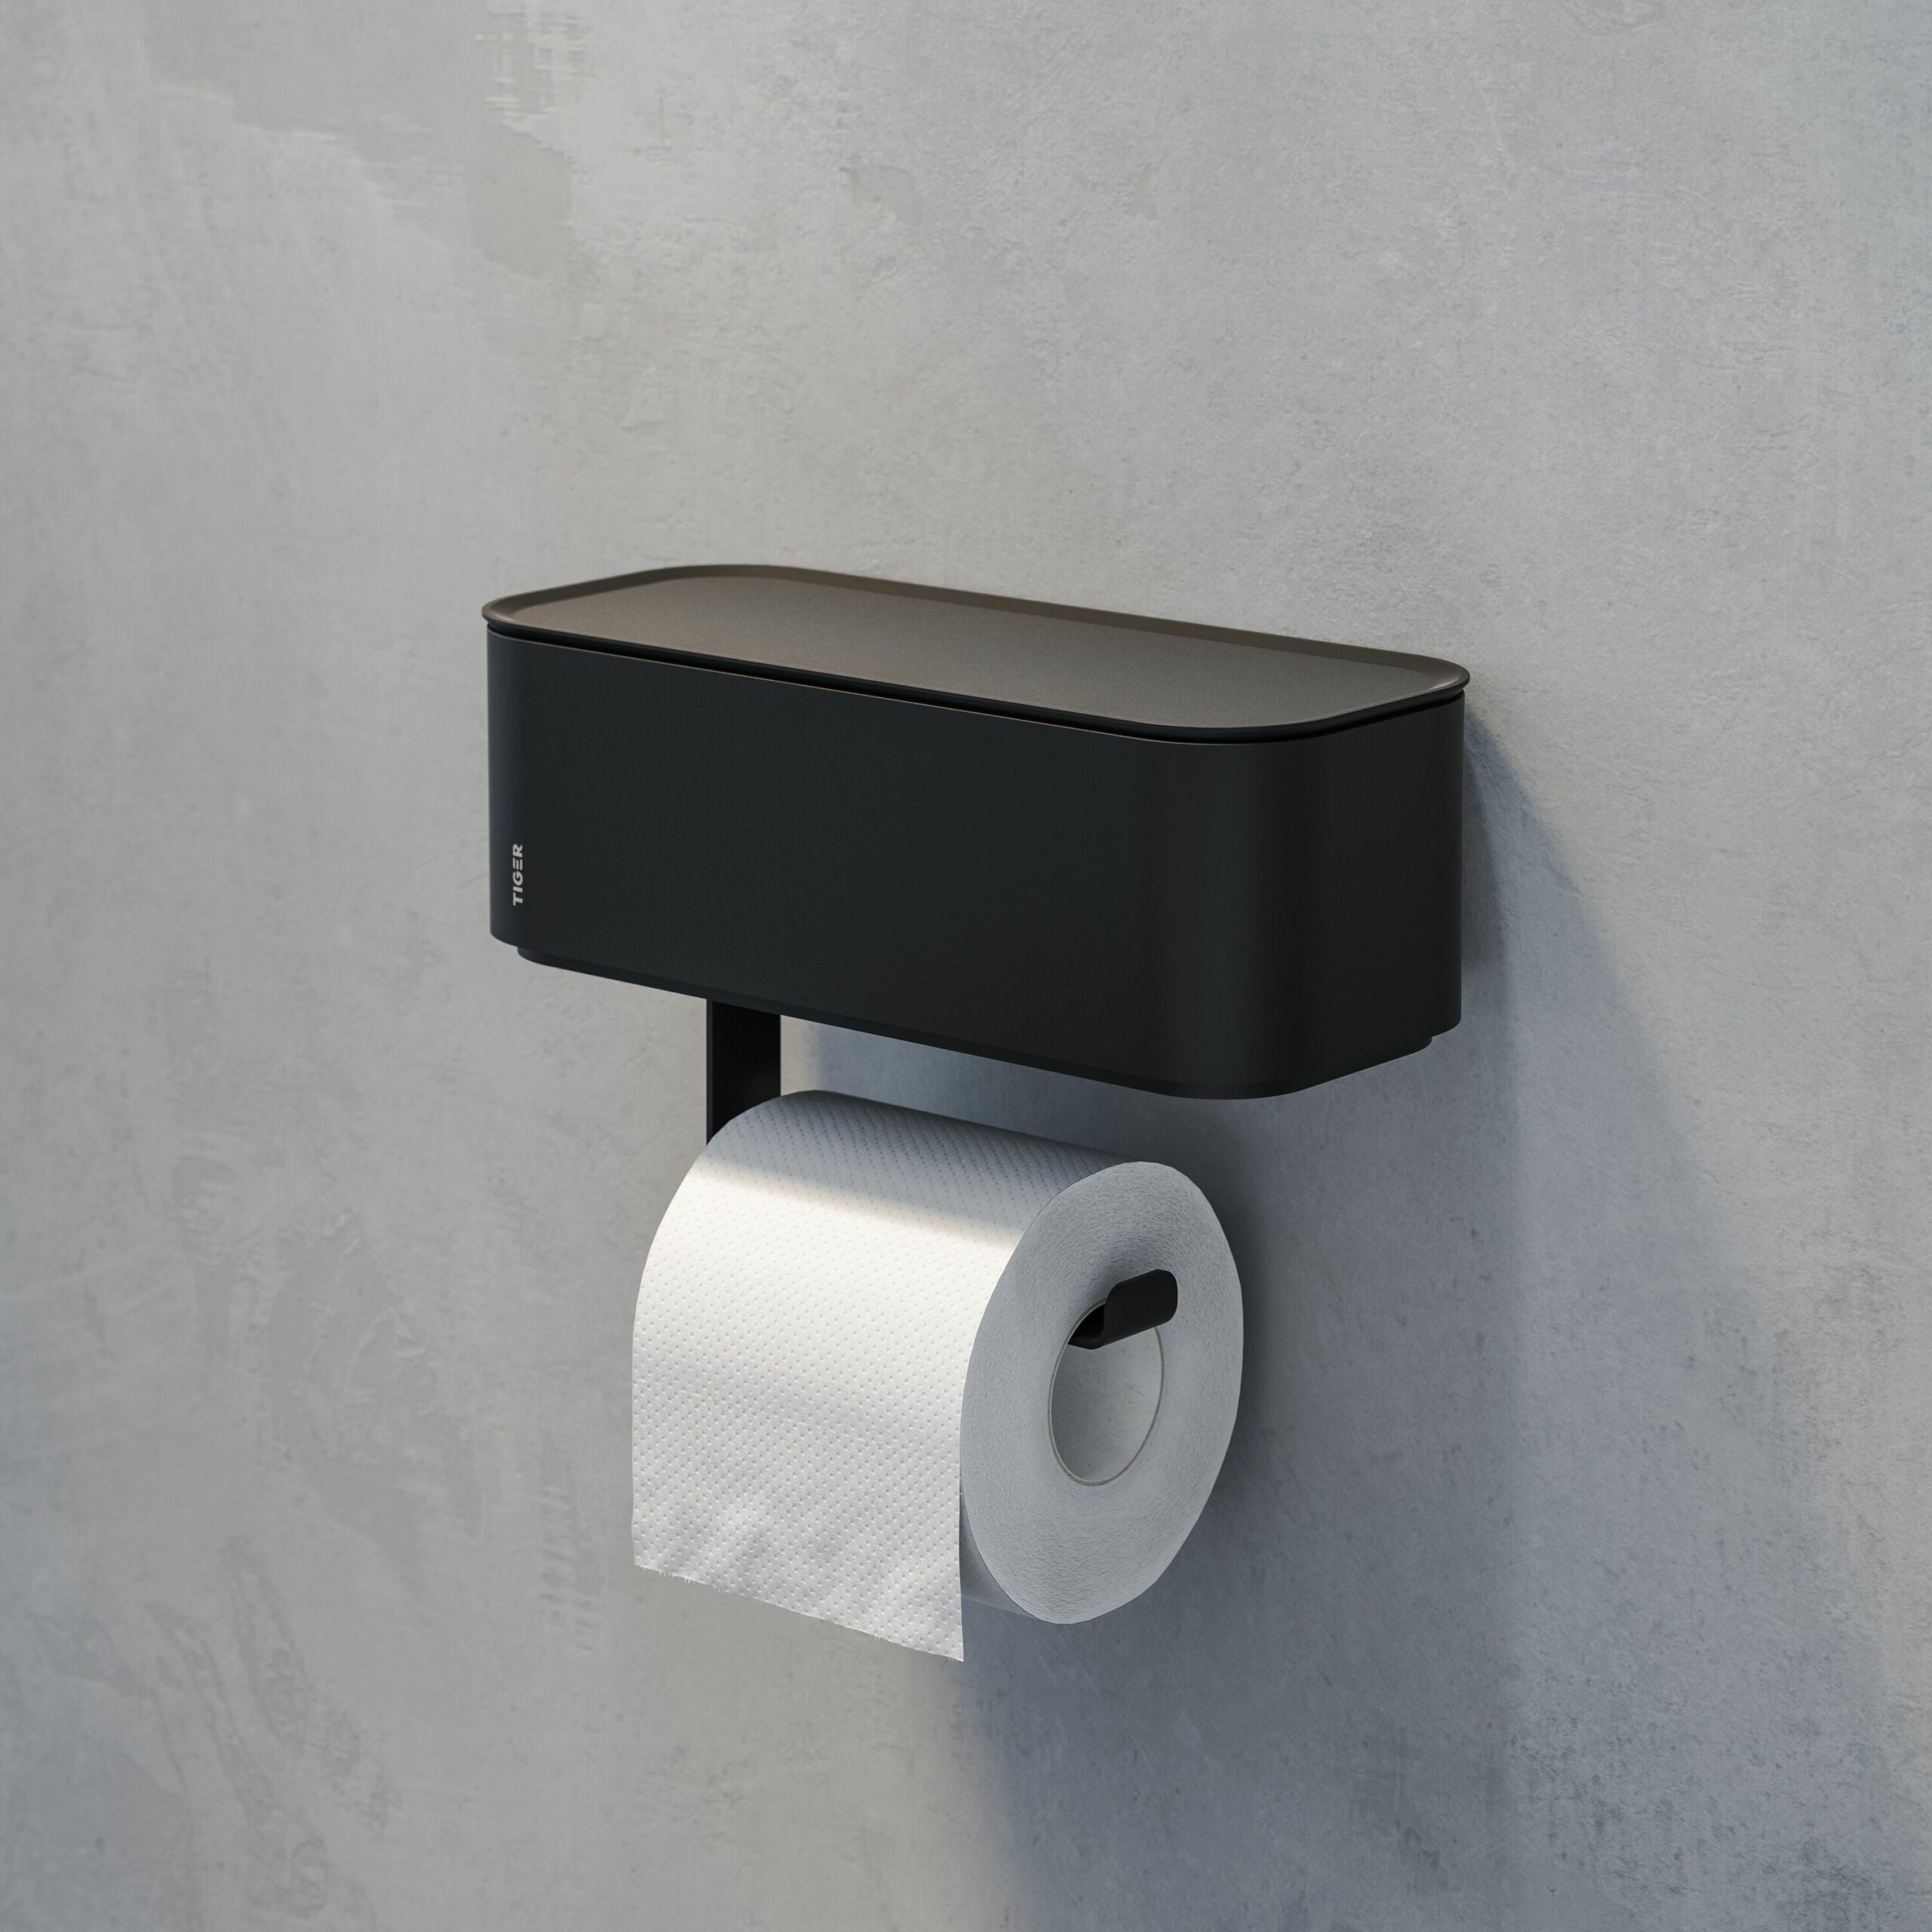 Toilet roll holder with storage box accessories for bathroom